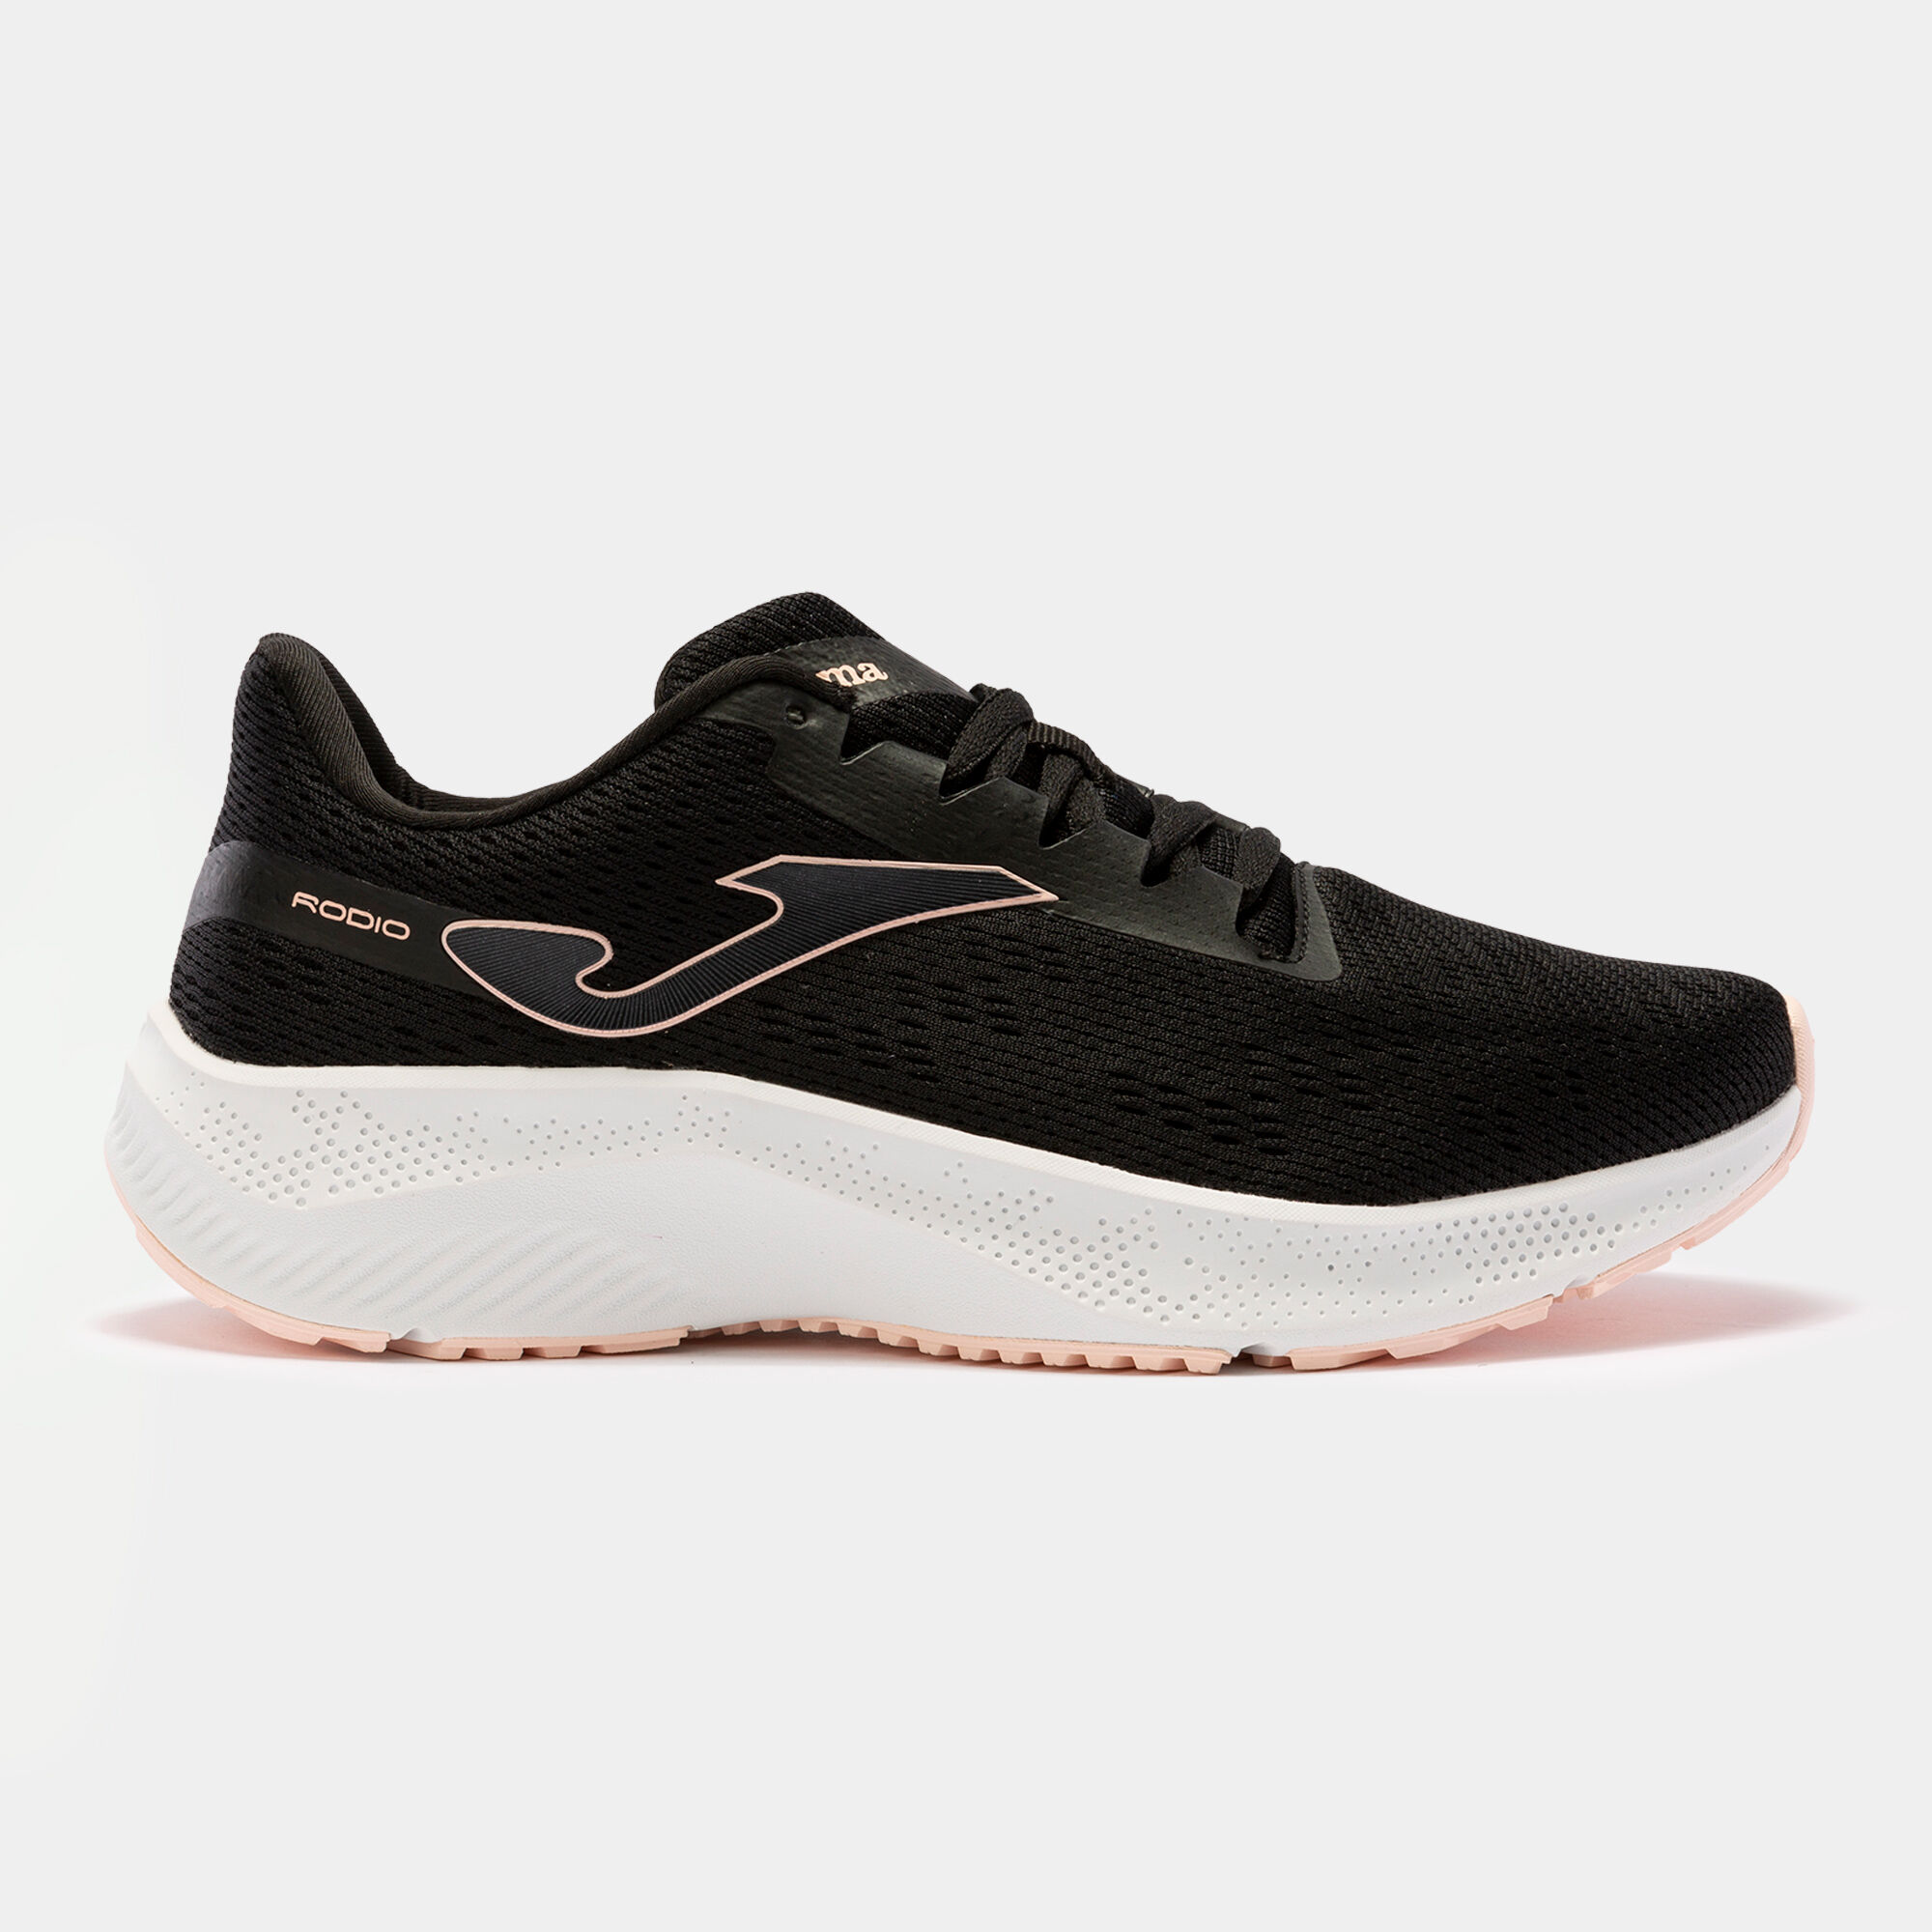 RUNNING SHOES RODIO 22 WOMAN BLACK